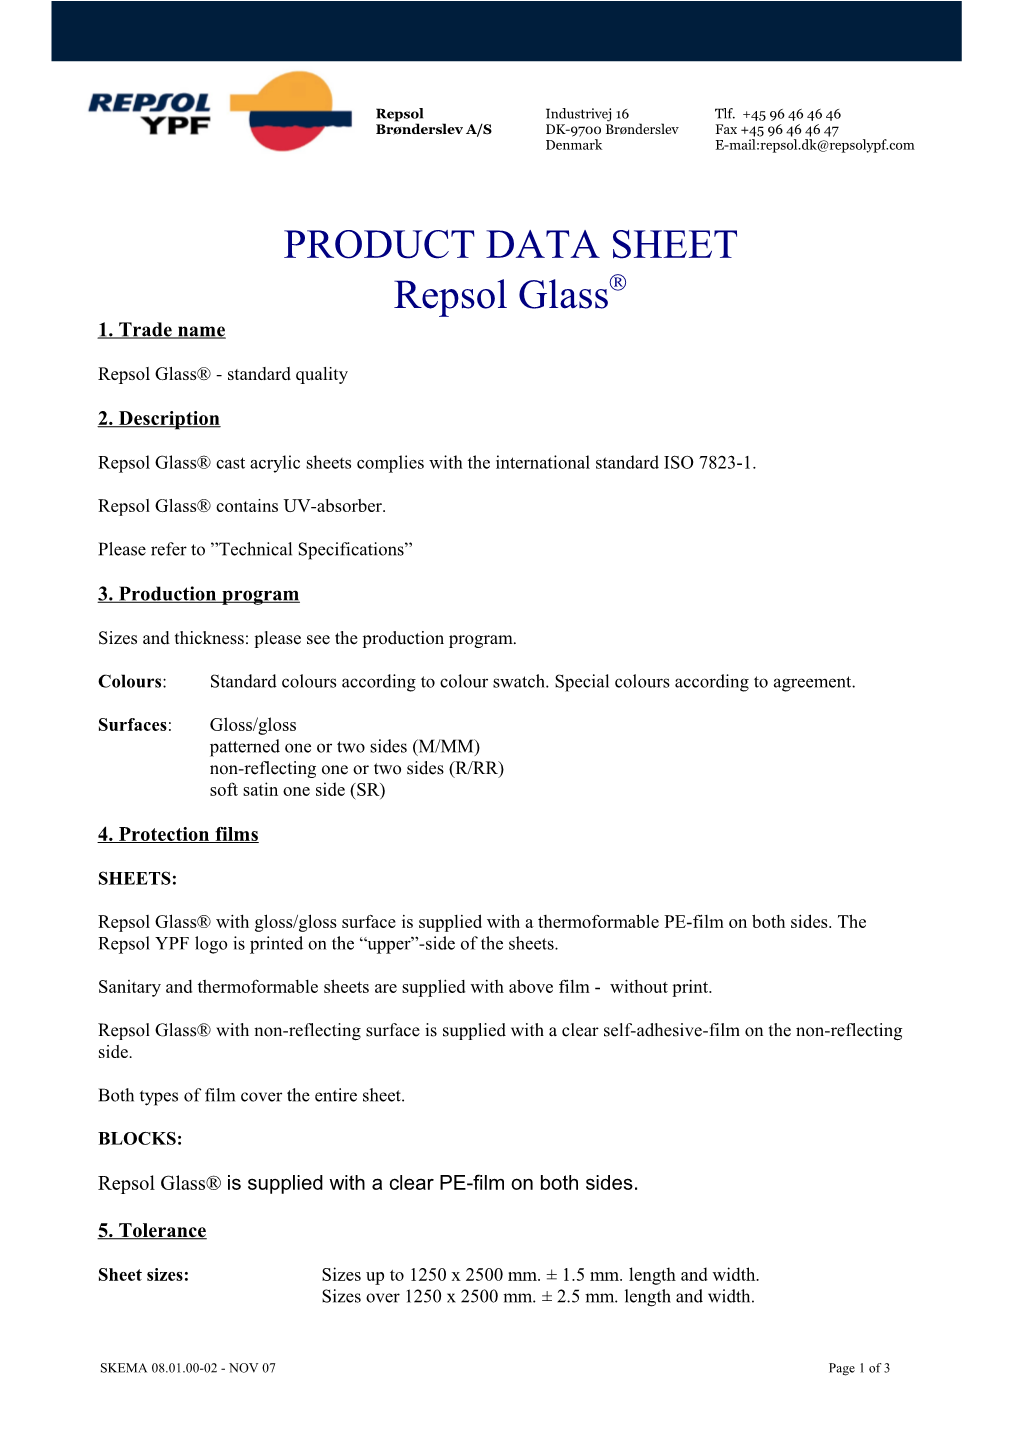 Product Data Sheet s2